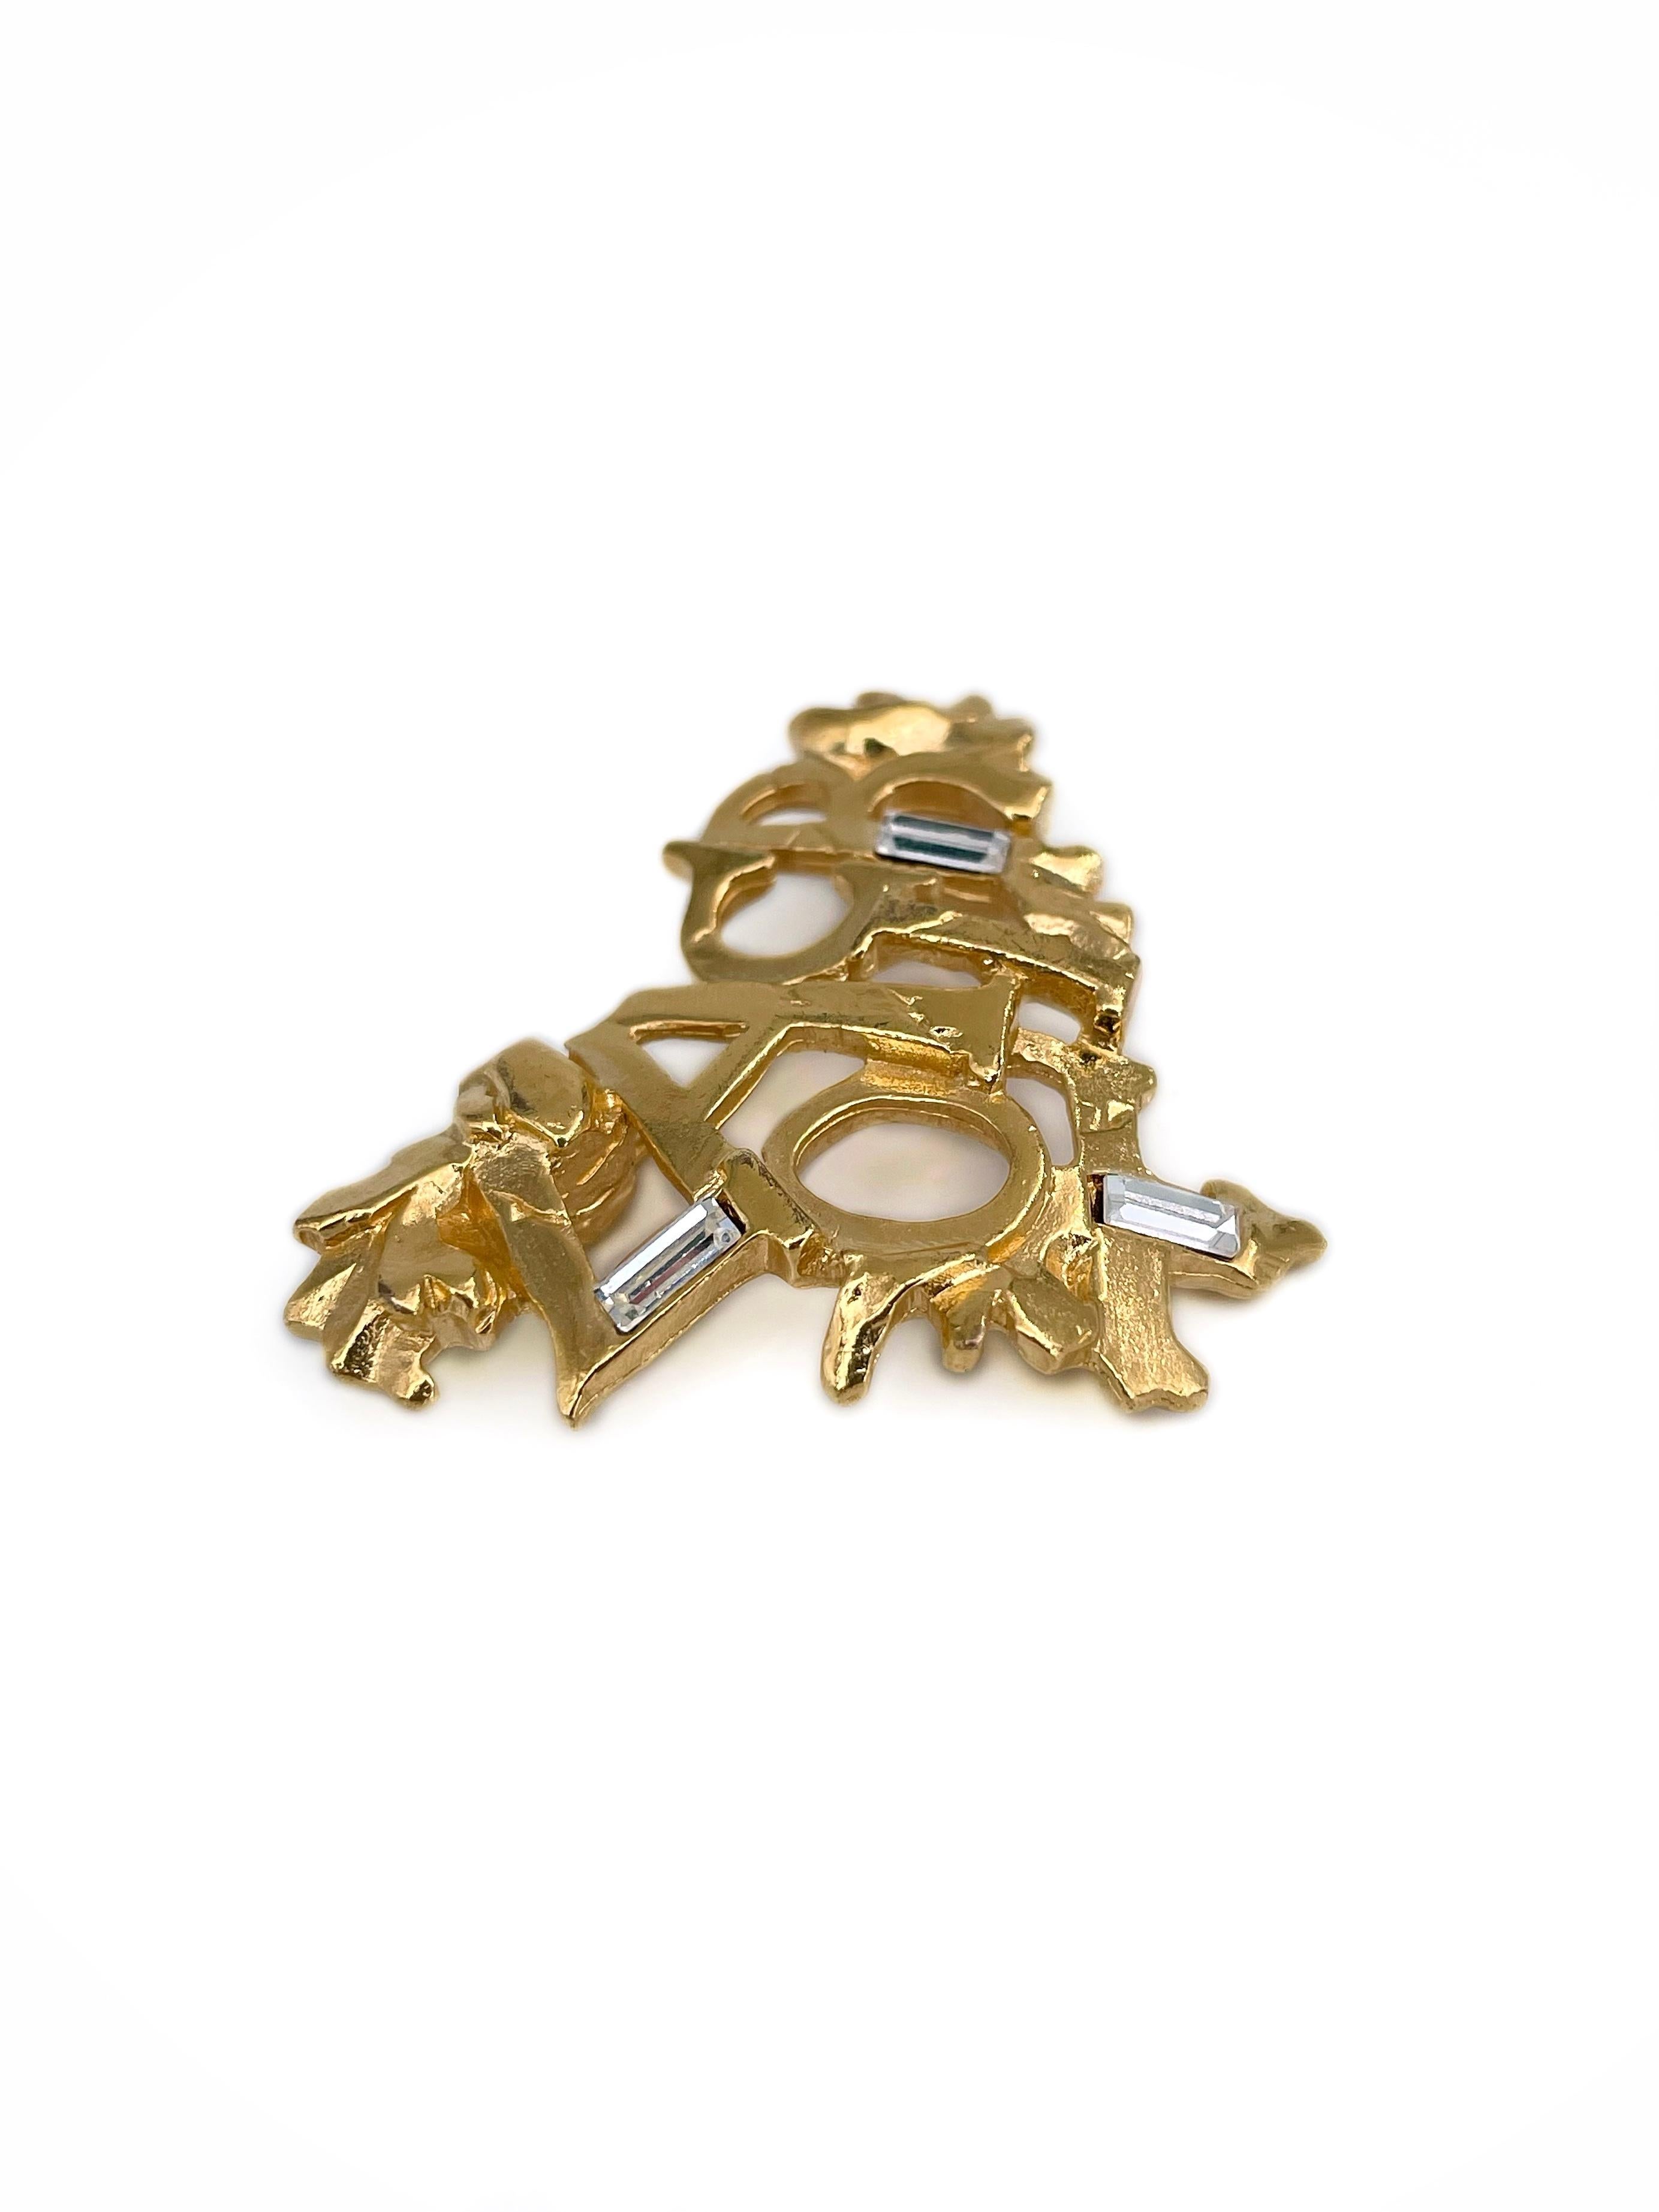 This is an openwork logo monogram heart pin brooch designed by Christian Lacroix in 1990’s. The piece is gold plated and adorned with clear crystals. 

Signed: “CL - Made in France”.

Size: 4x3cm

———

If you have any questions, please feel free to